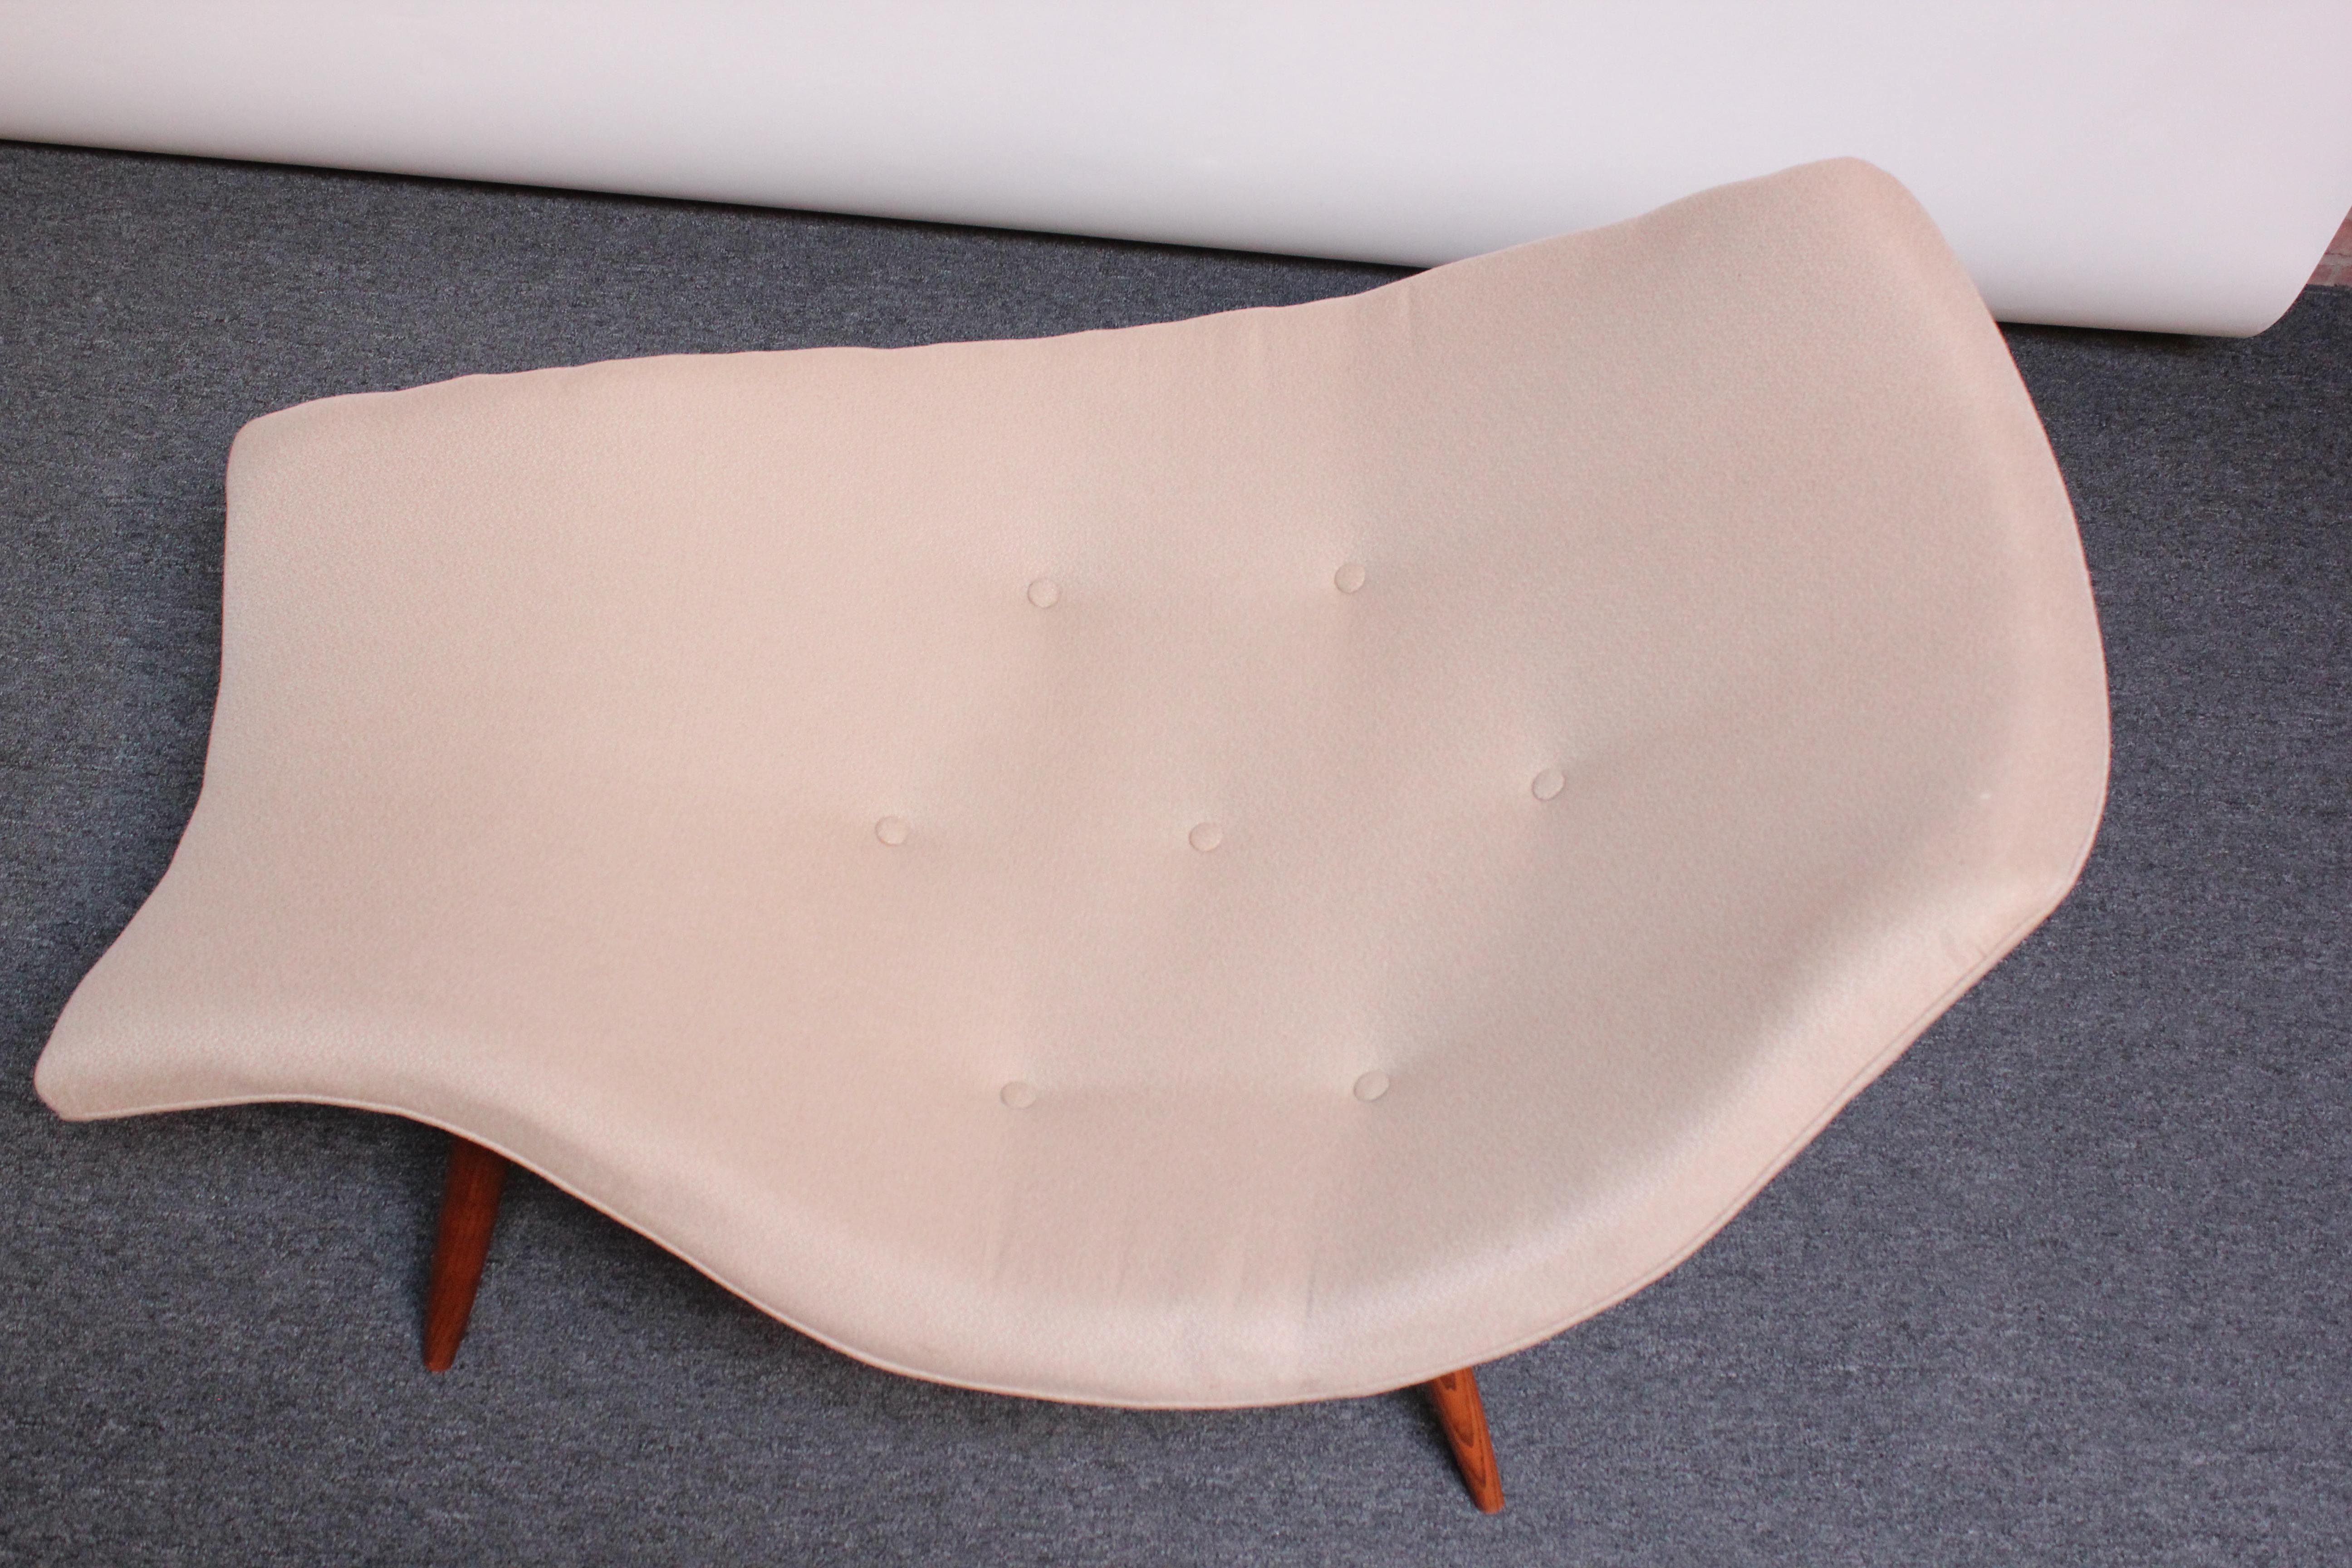 American Vintage Sculptural Adrian Pearsall Chaise Lounge for Craft Associates